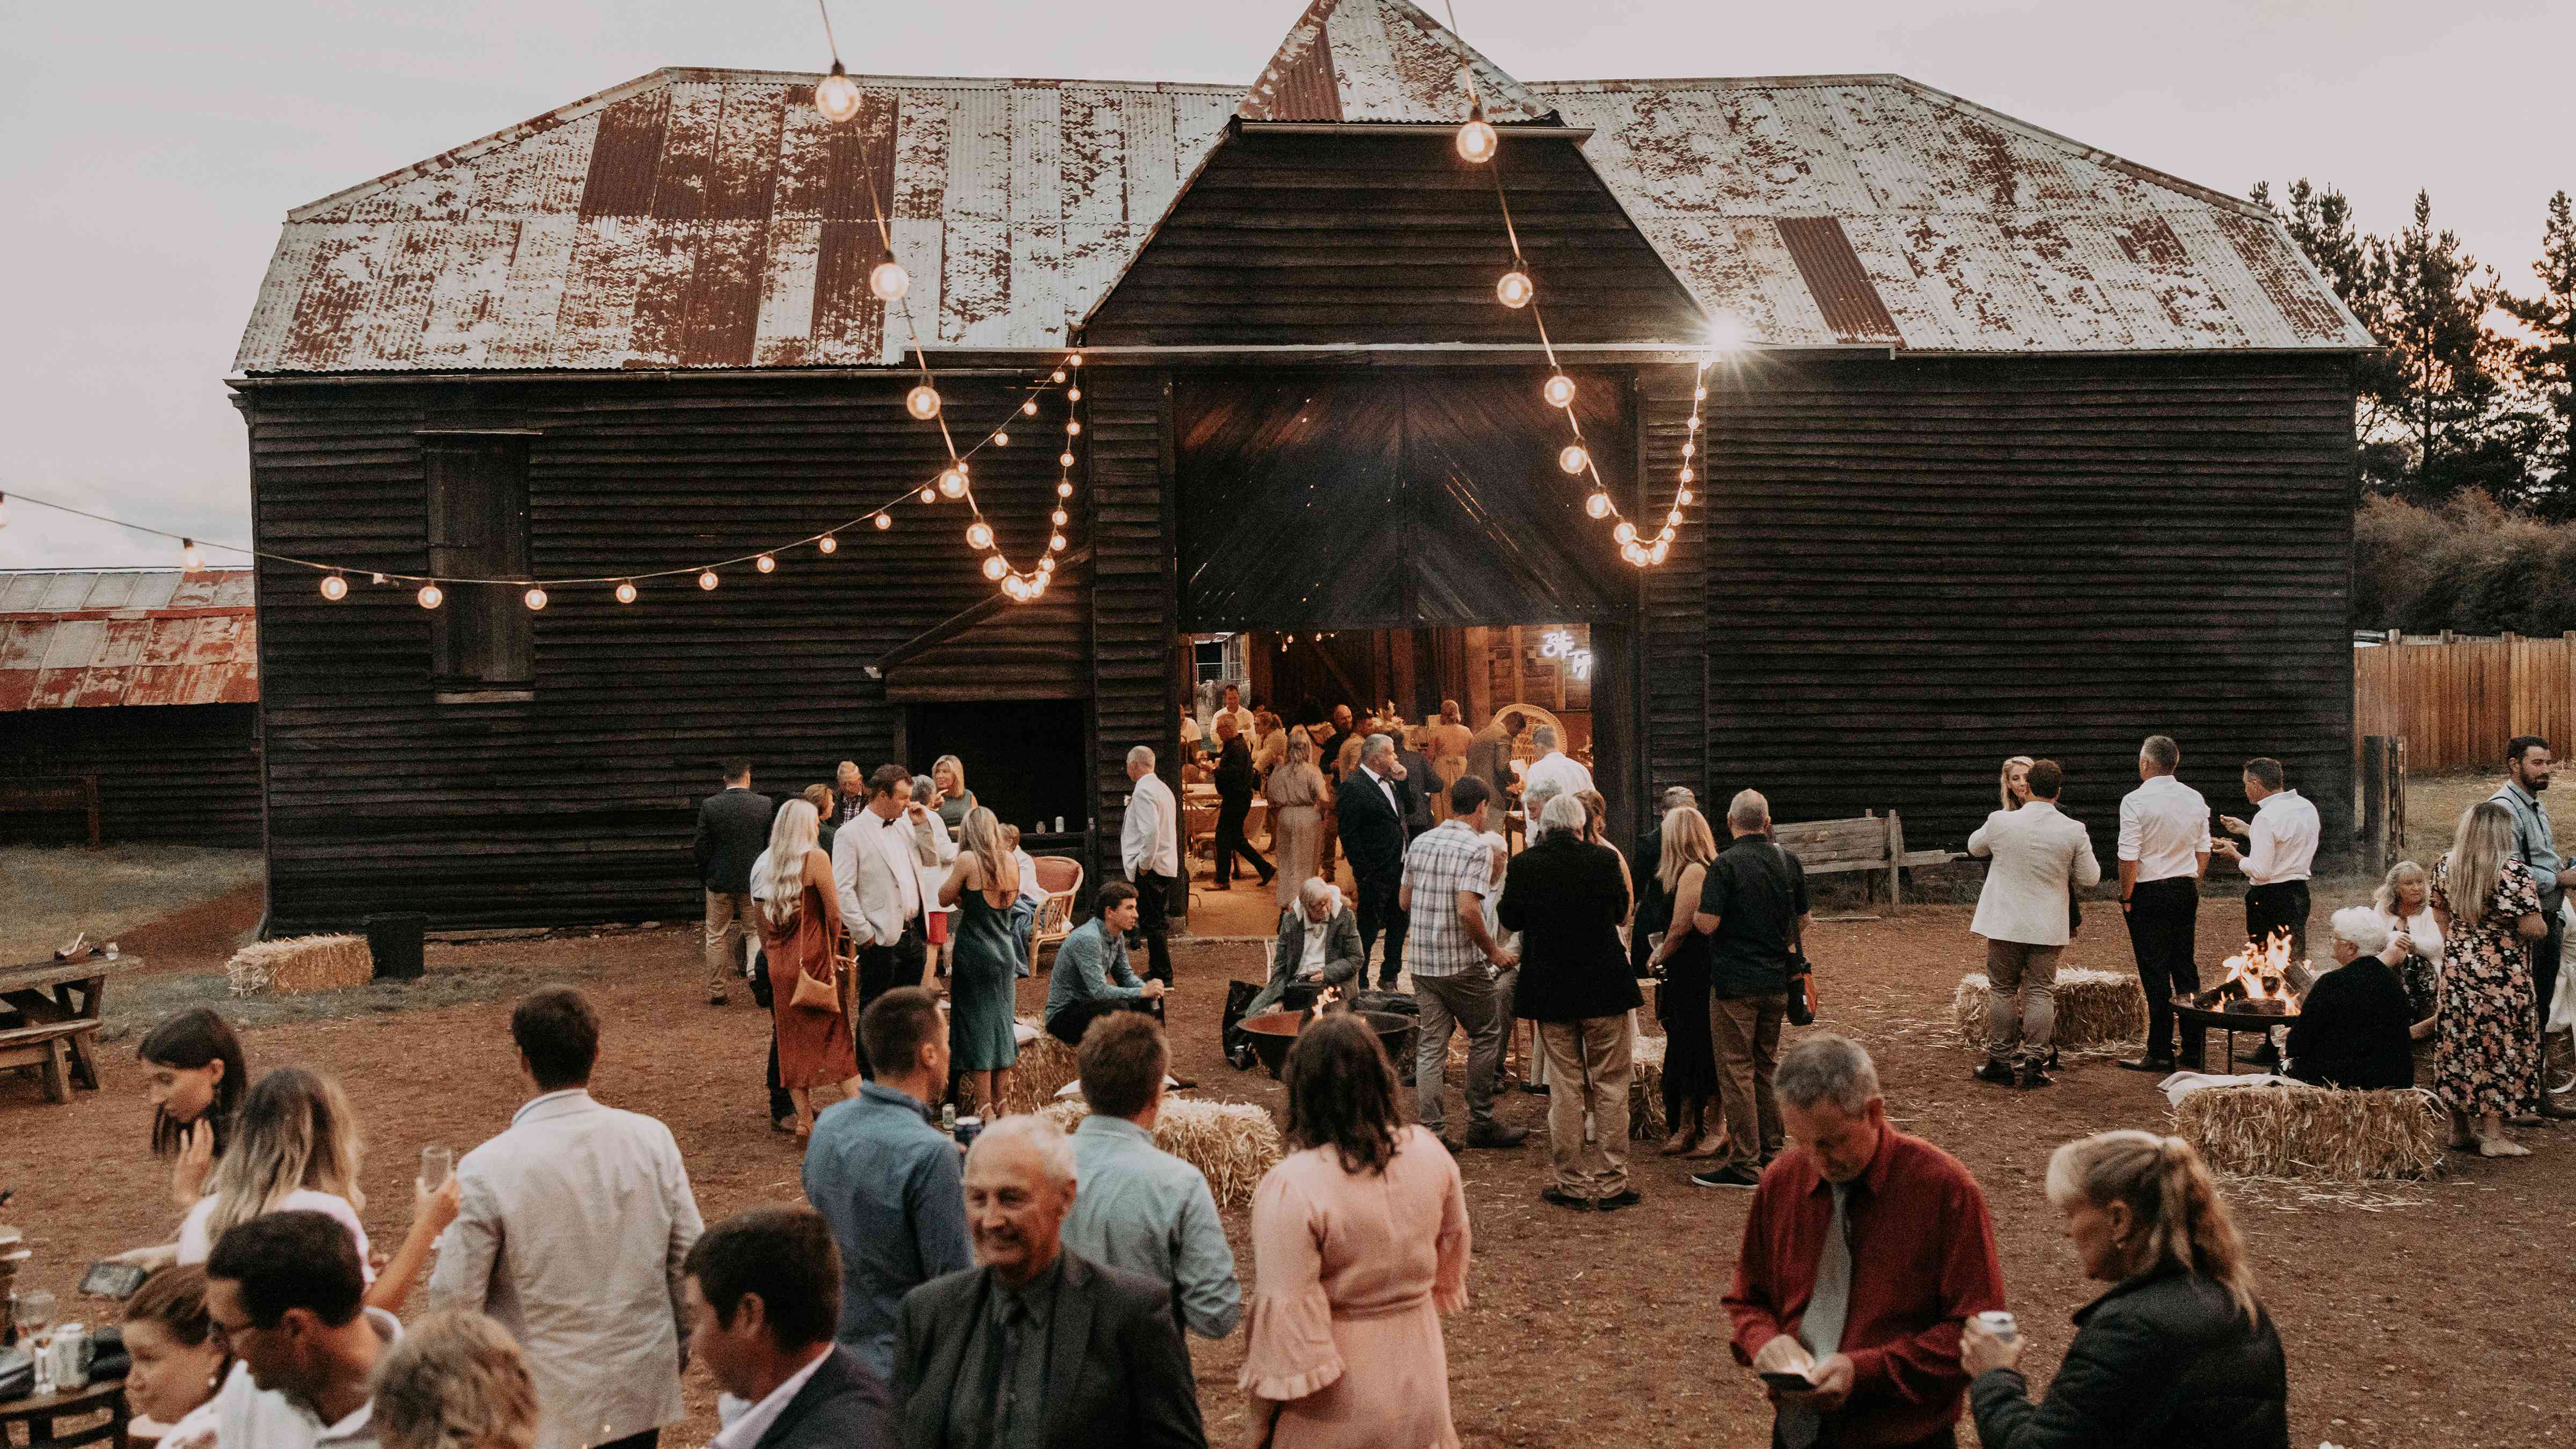 The Sussex timber barn and quadrangle is set for an outdoor wedding reception. Hay bales, fire pits and festoon lights decorate the area along with timber outdoor tables. Guests are mingling outside and inside the Barn. Photo: Tiarne Shaw Photography.